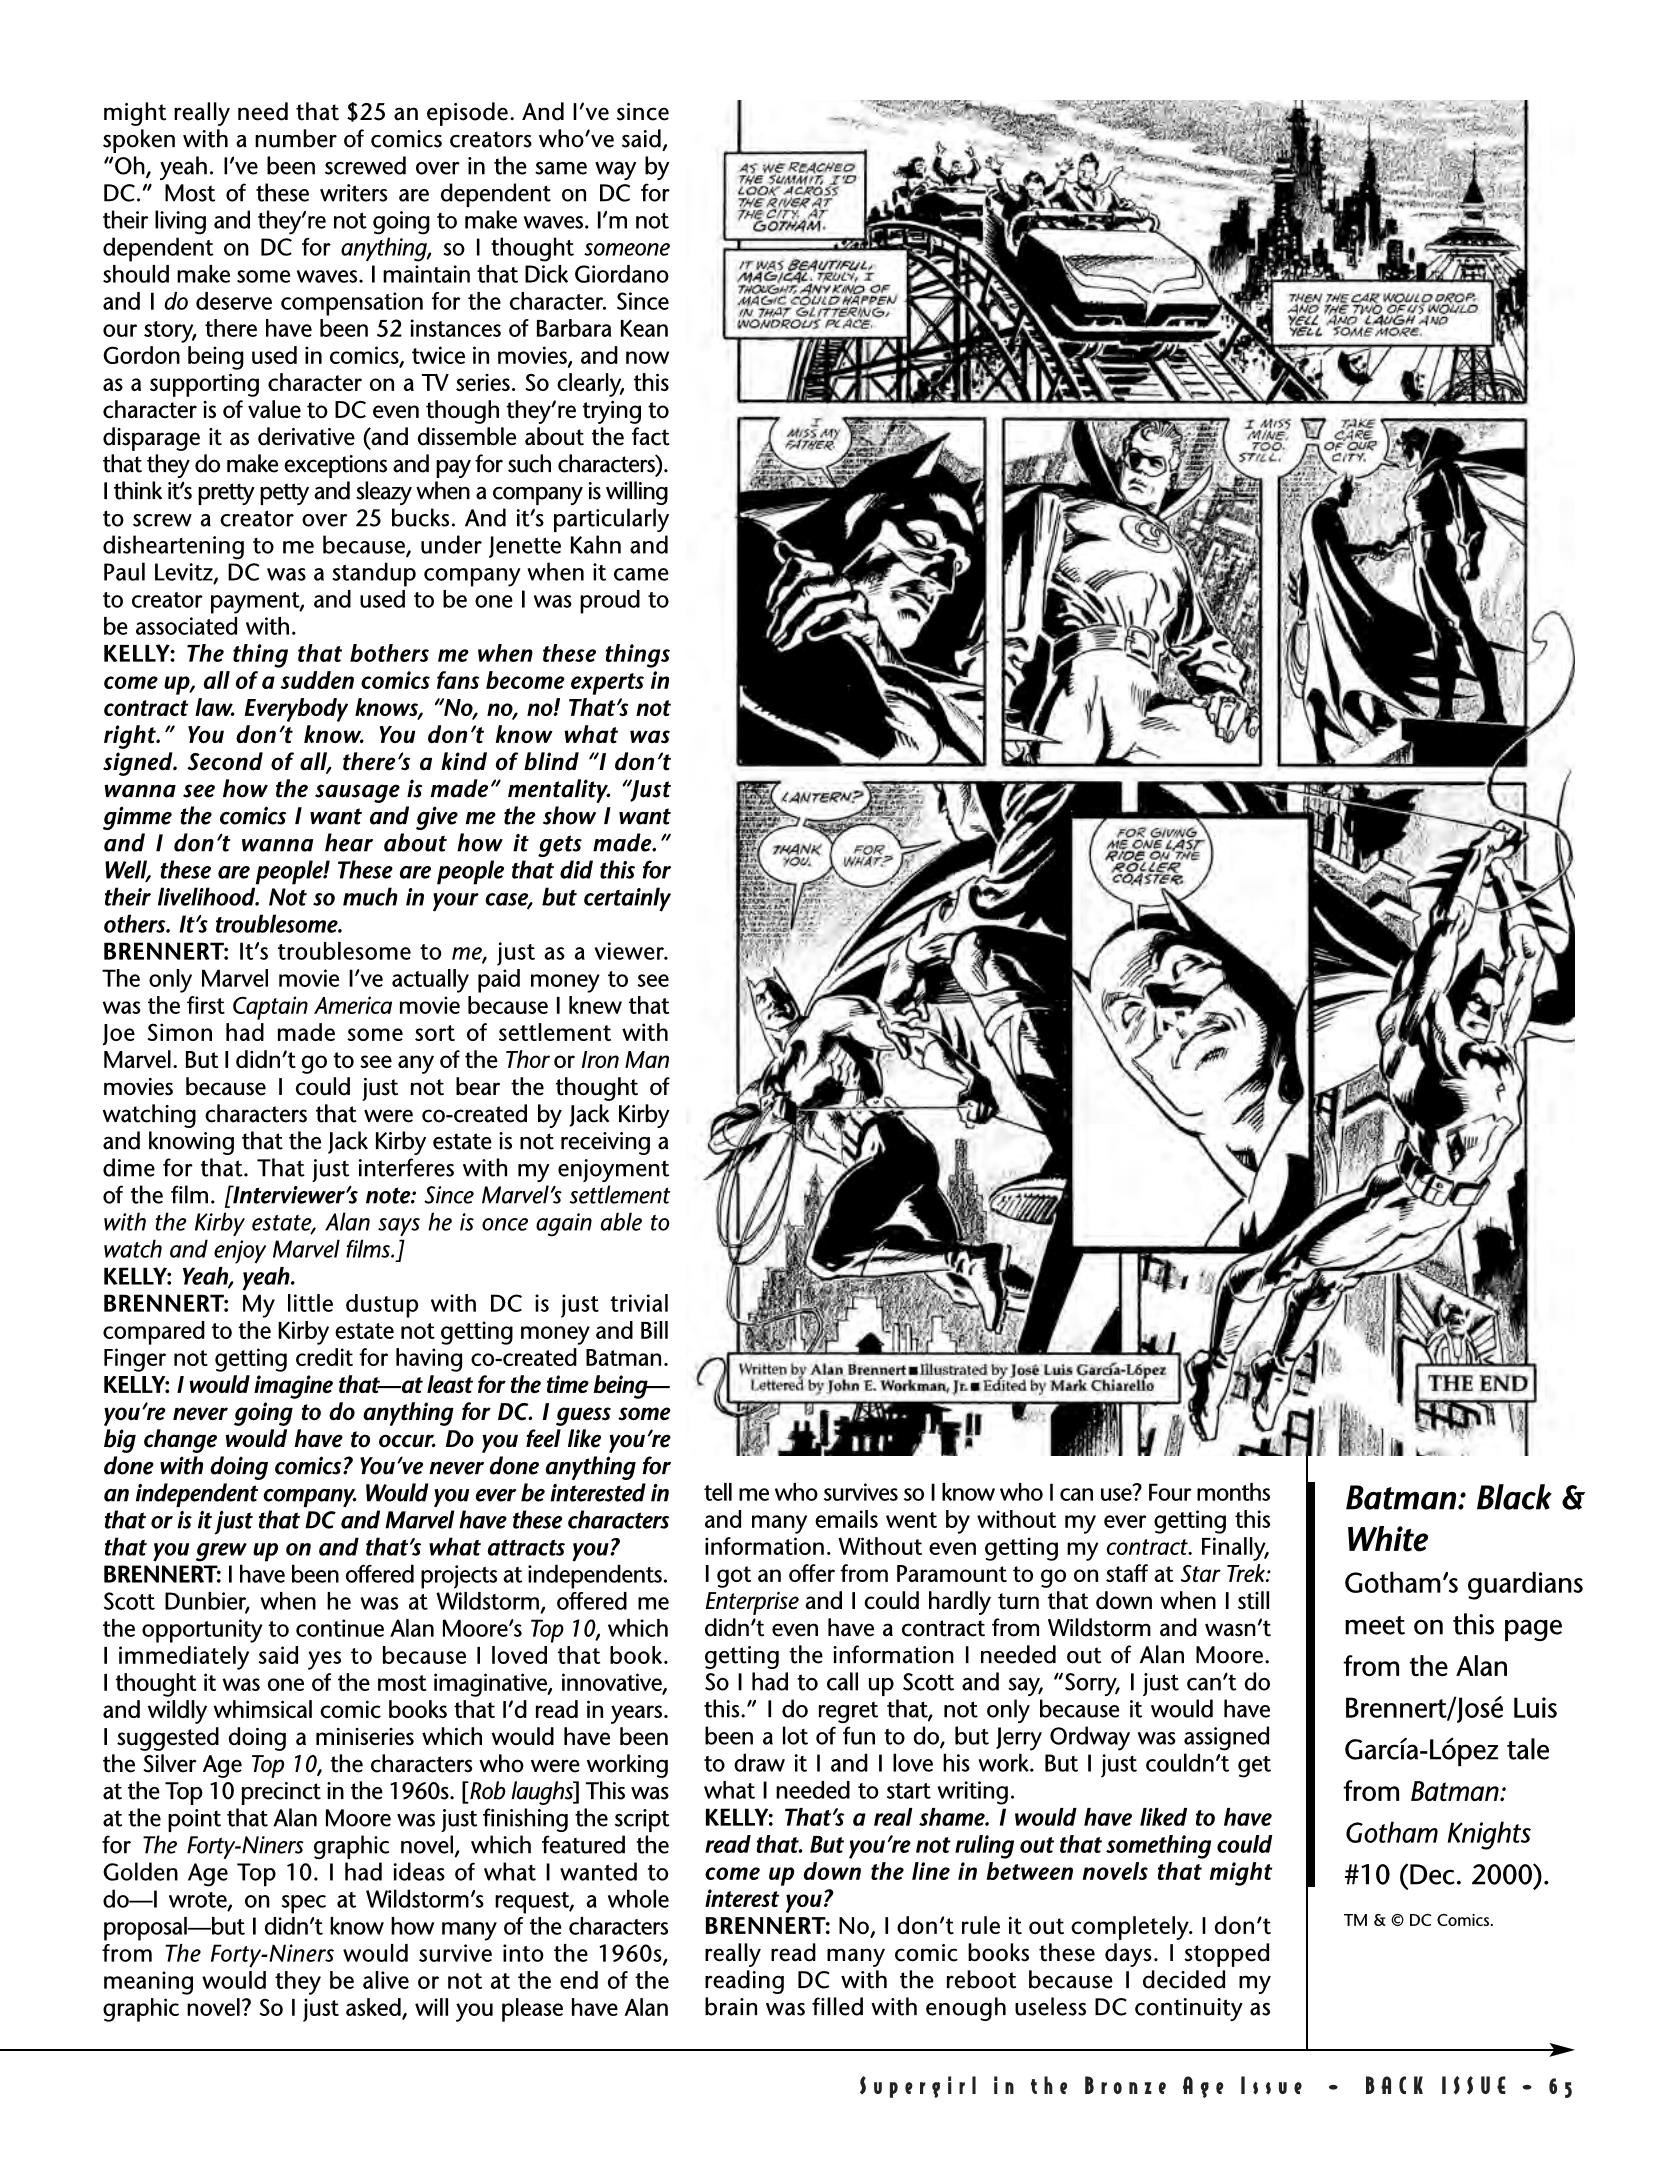 Read online Back Issue comic -  Issue #84 - 64